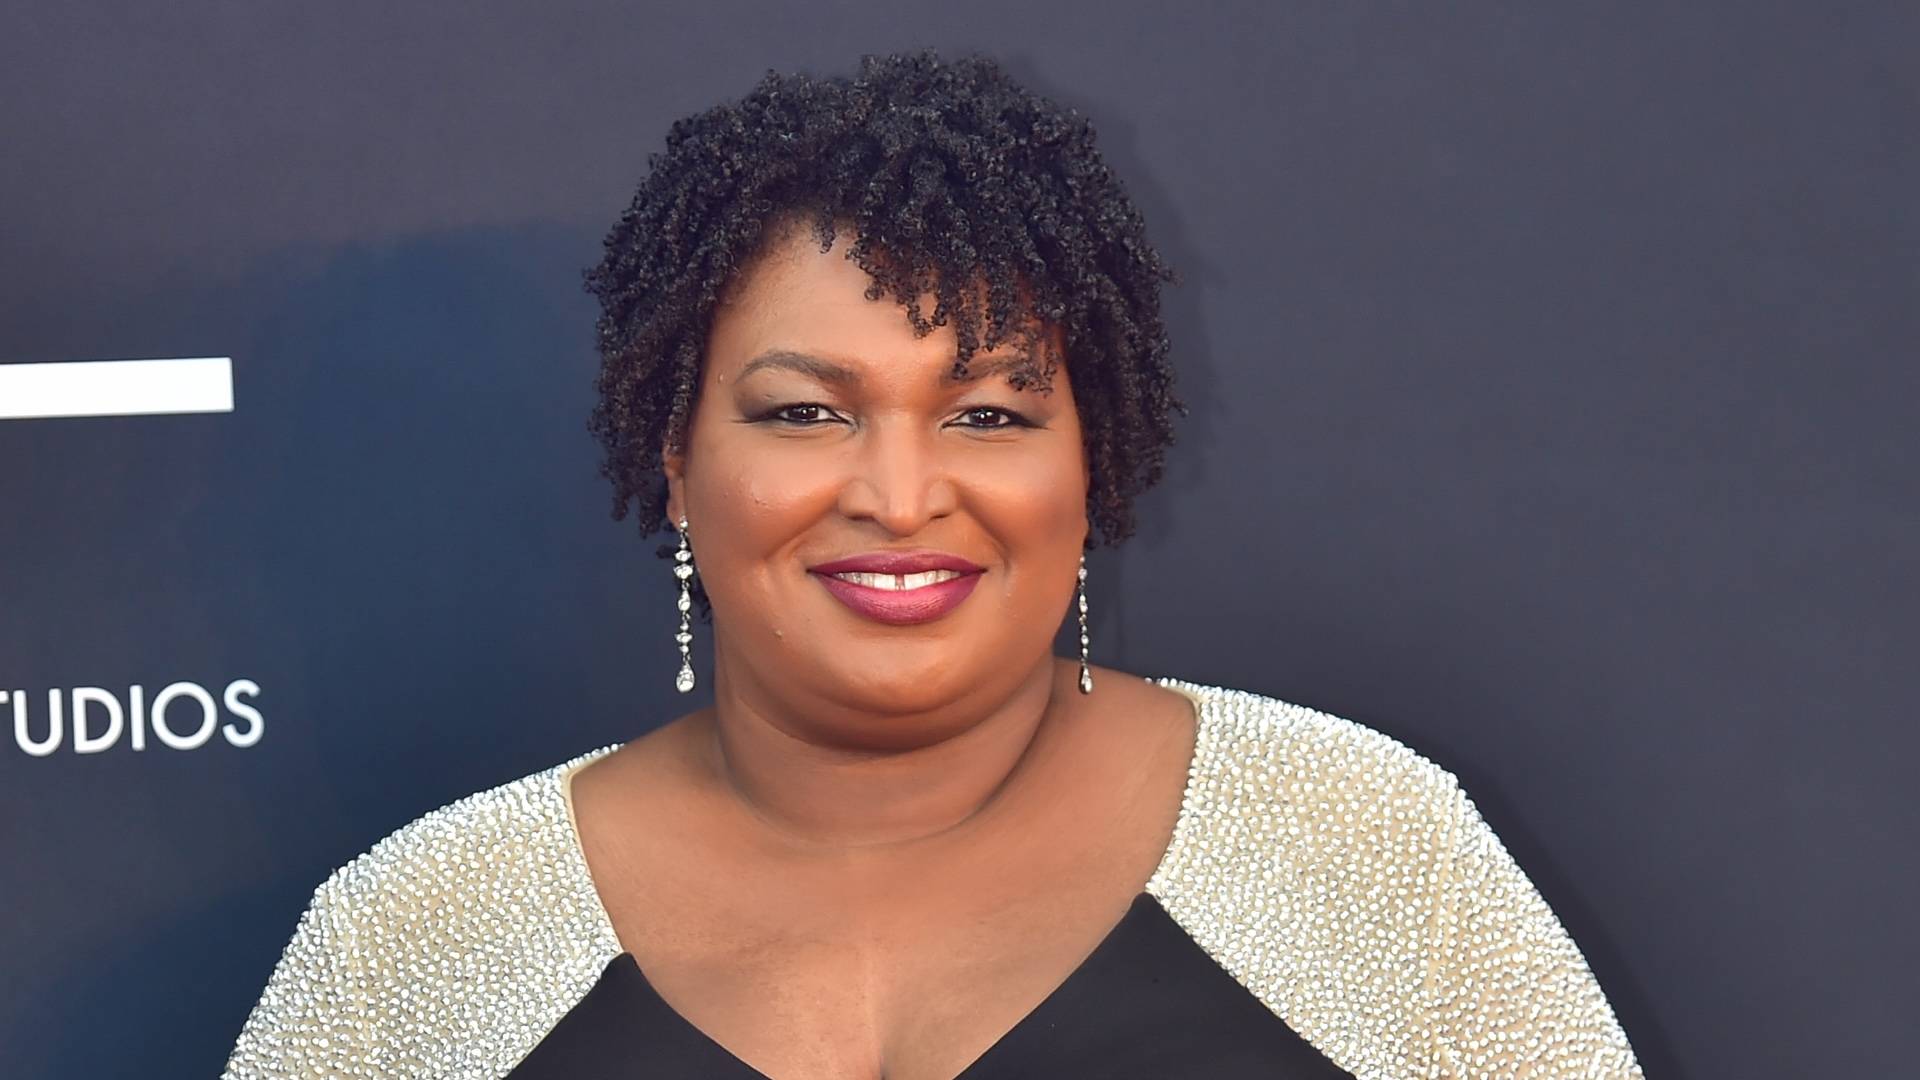 Stacey Abrams/NAACP Image Awards